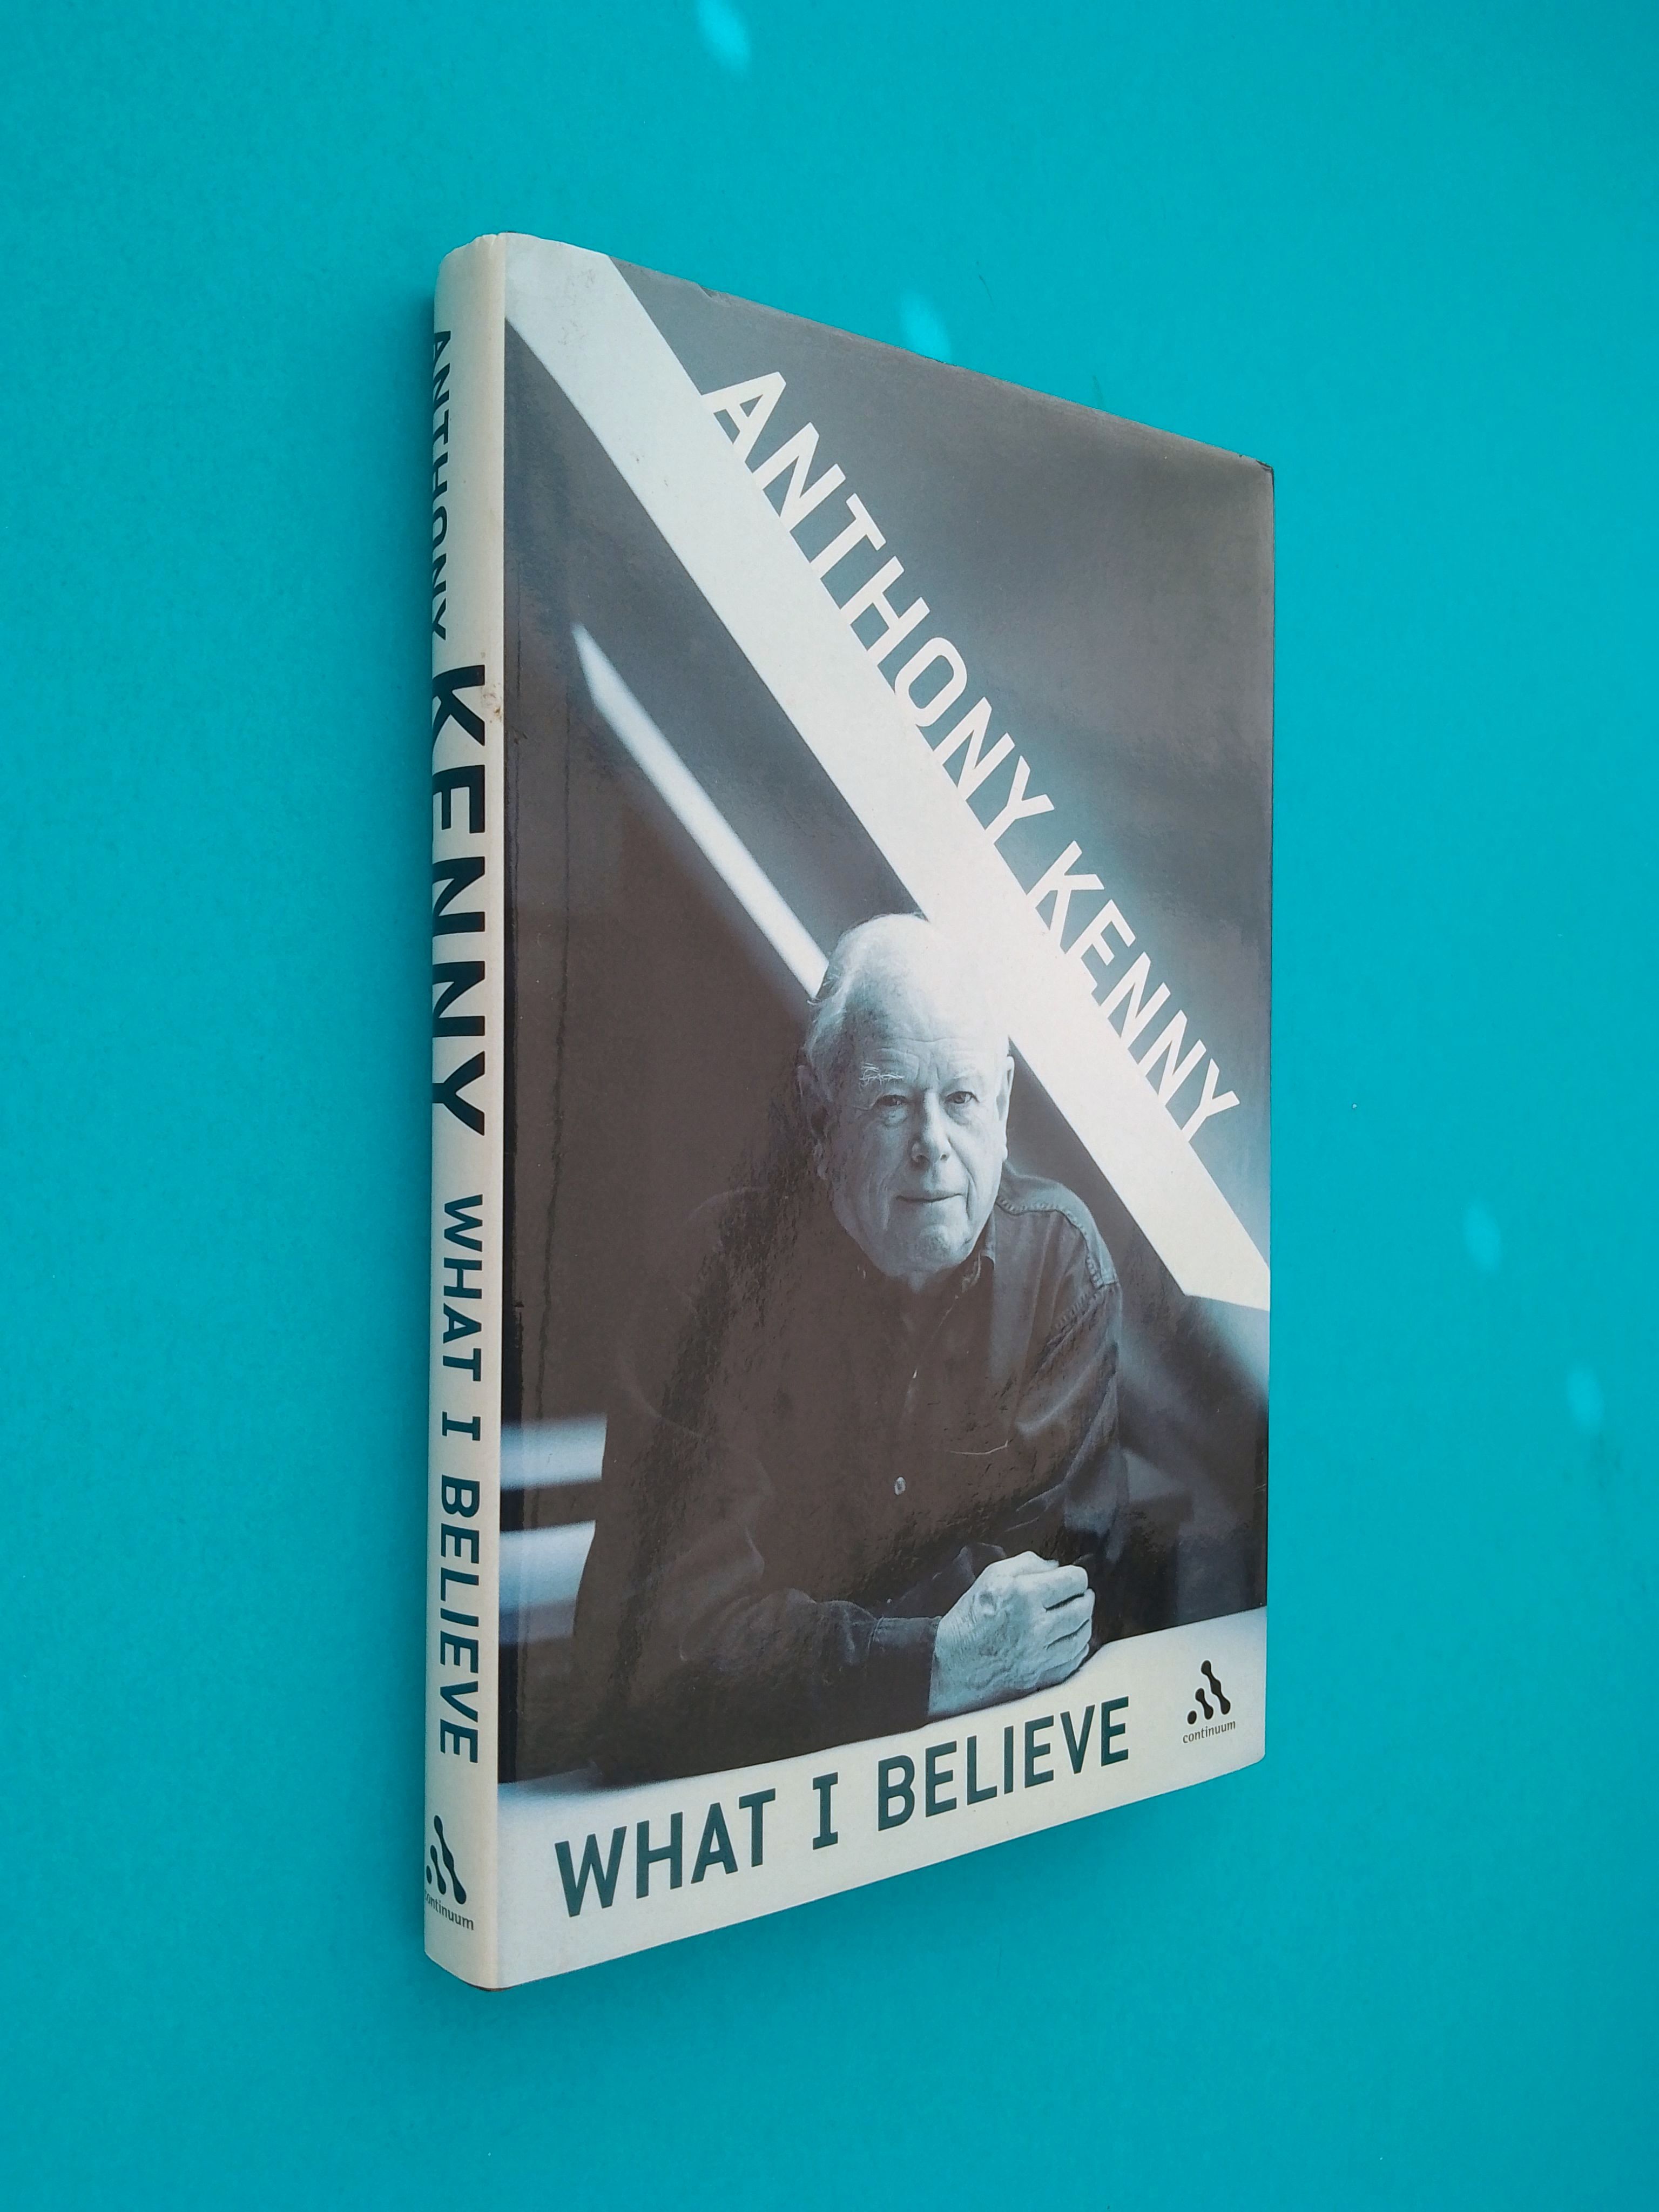 What I Believe - Anthony Kenny